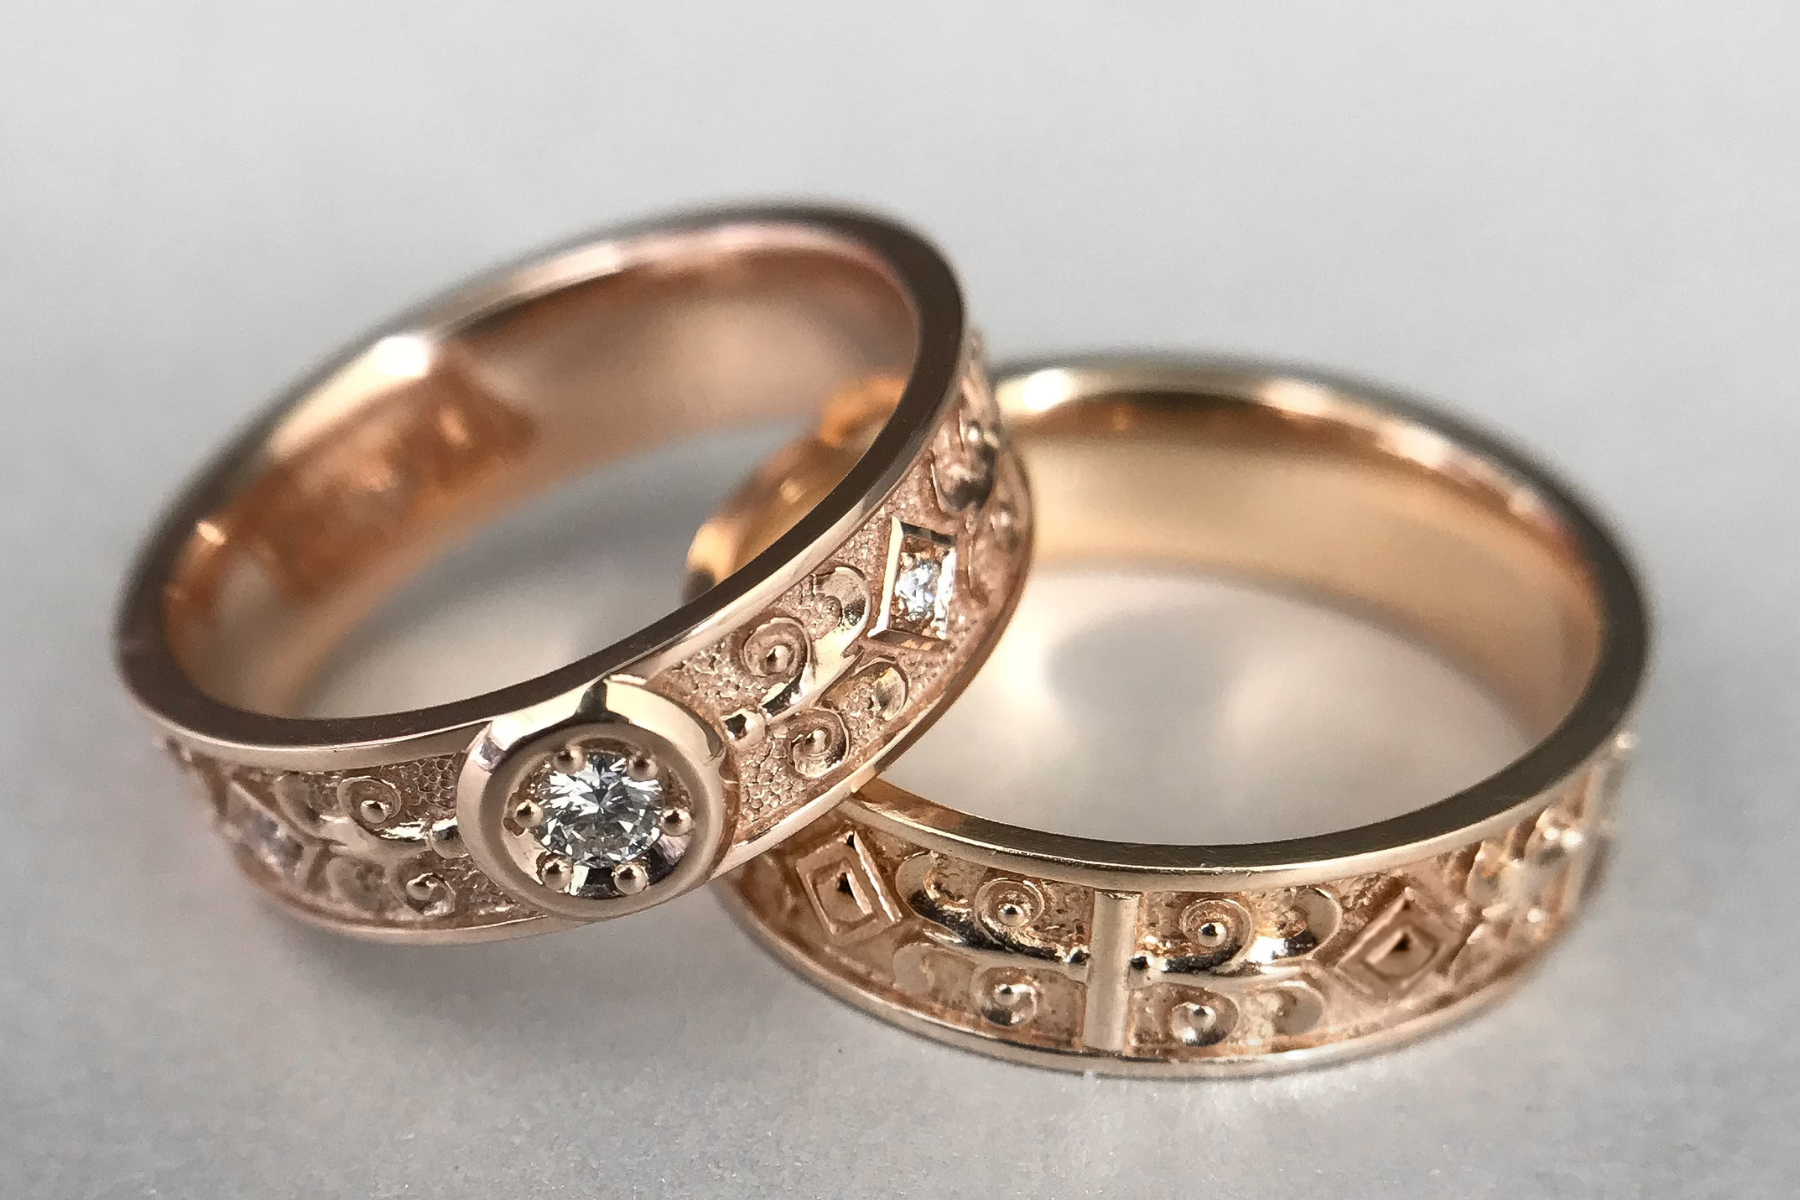 Antique Wedding Bands - Why They're Worth It